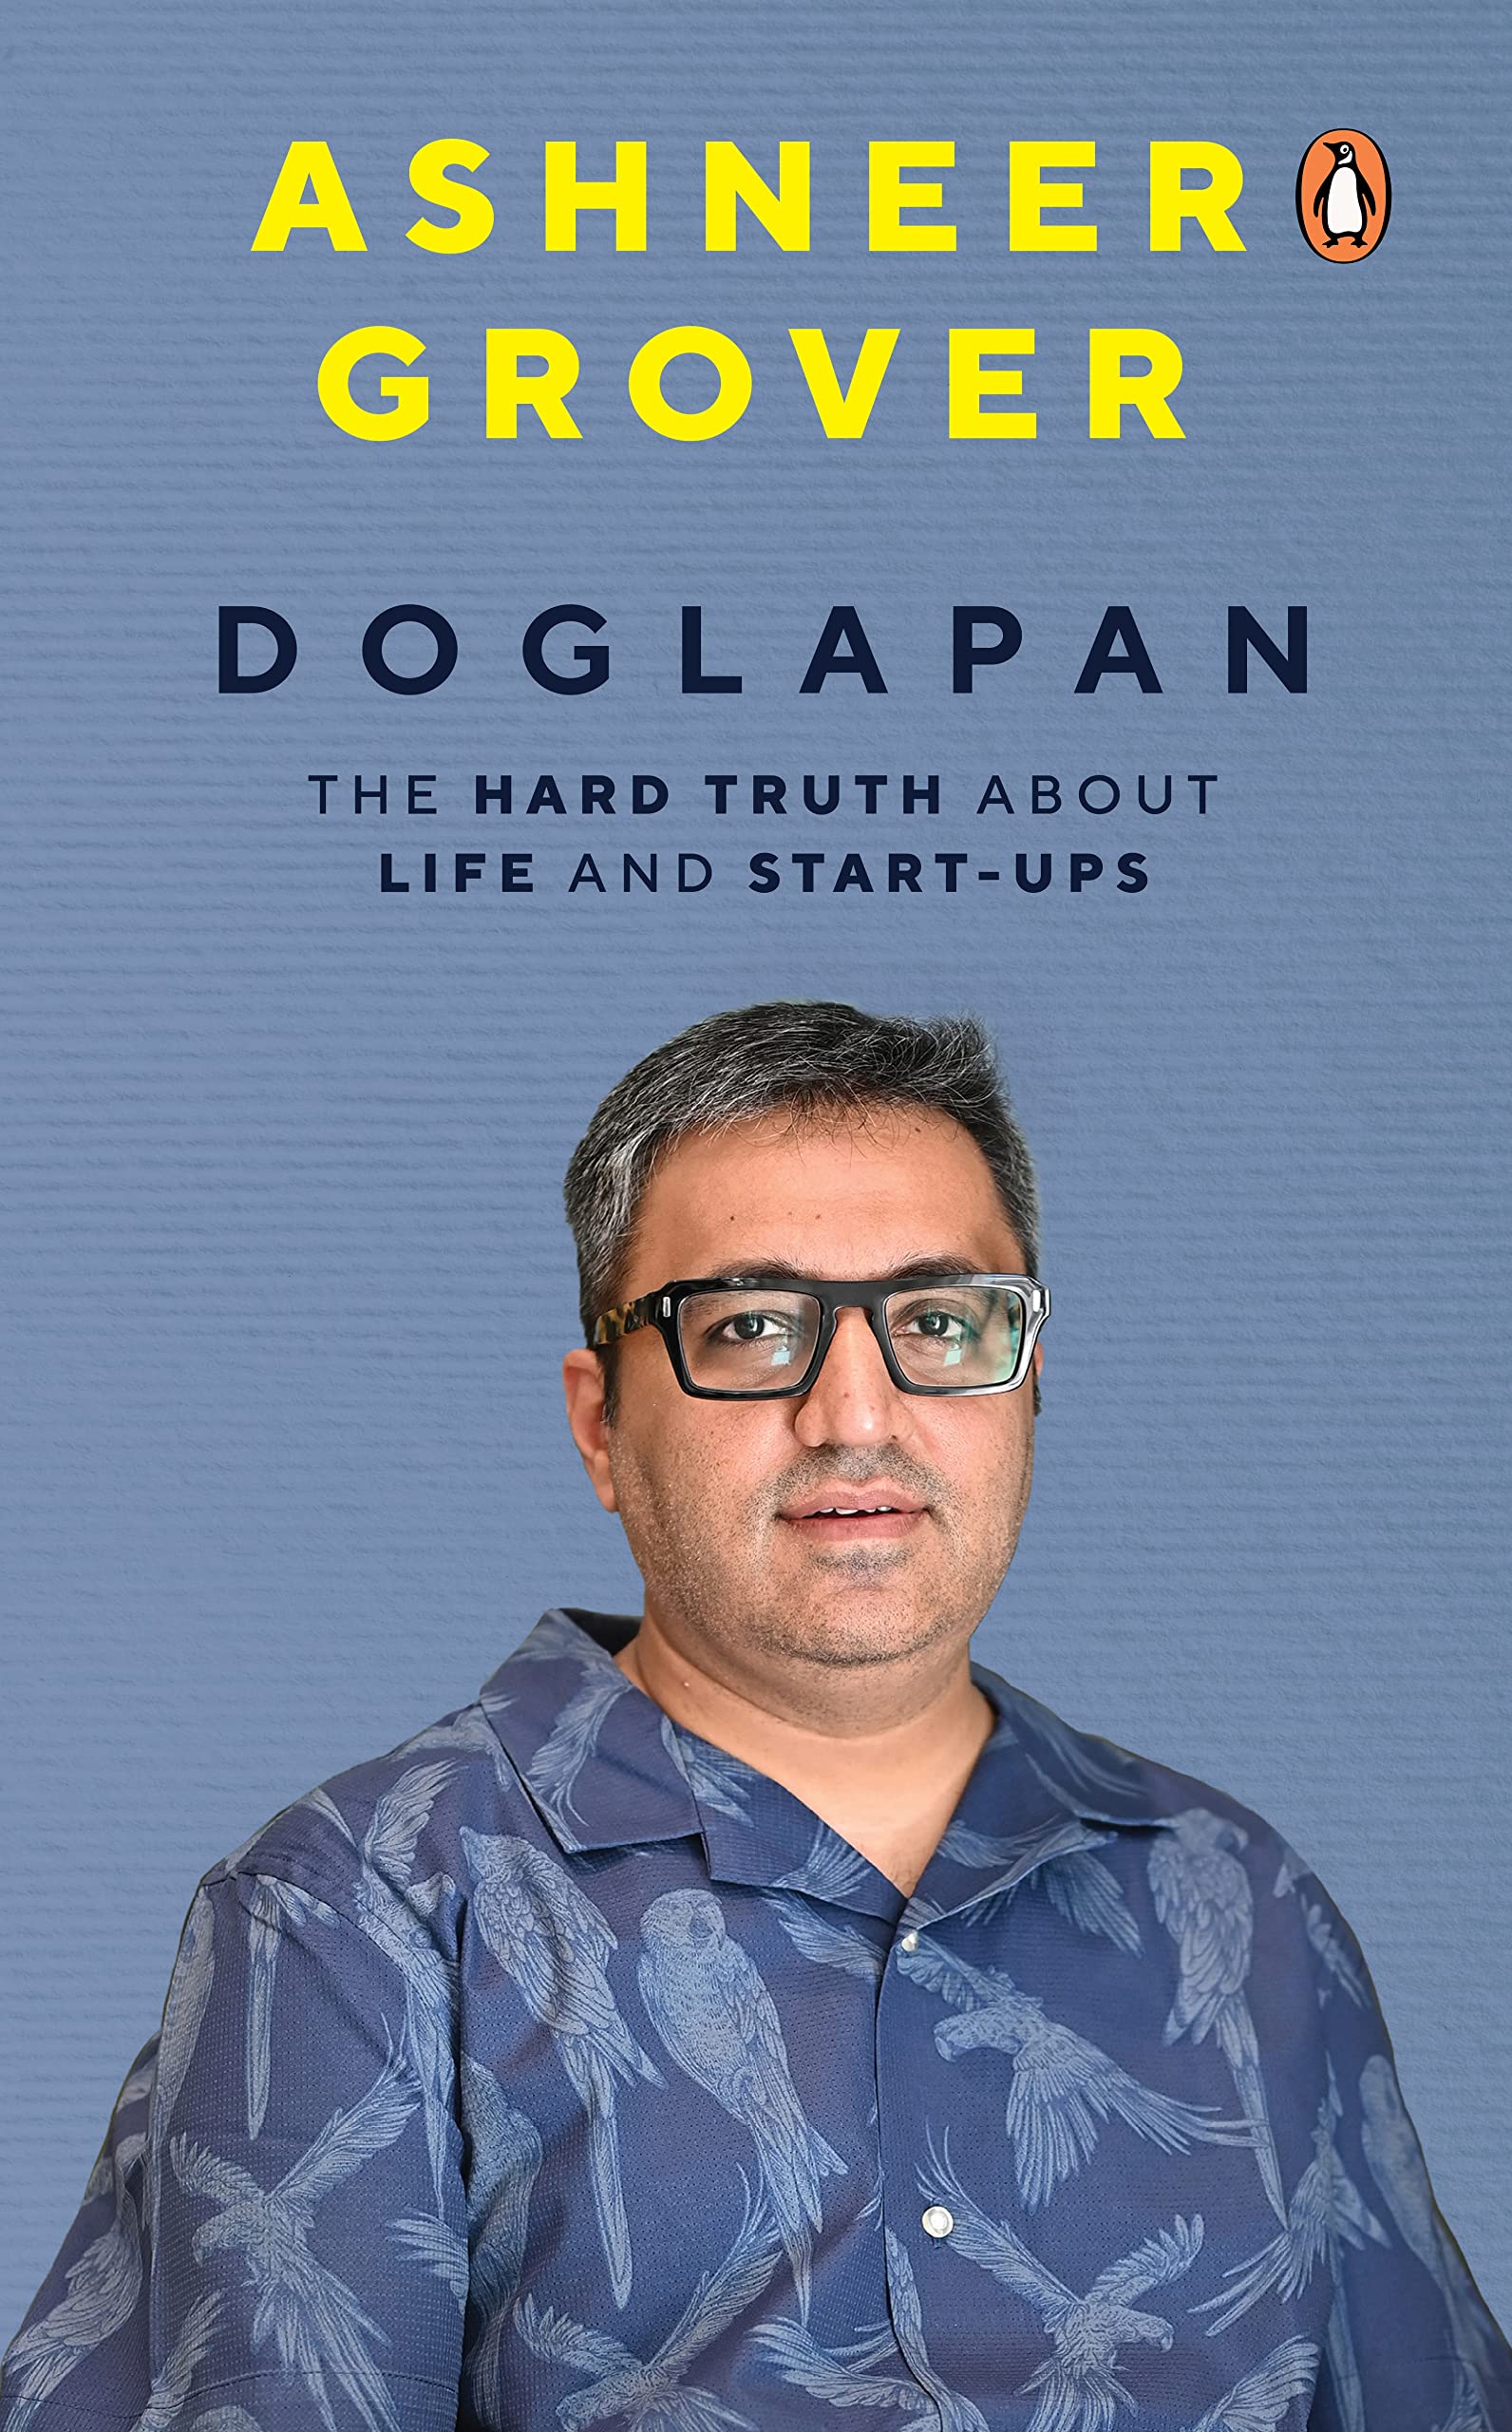 Doglapan: The Hard Truth about Life and Start-Ups – ashneer grover